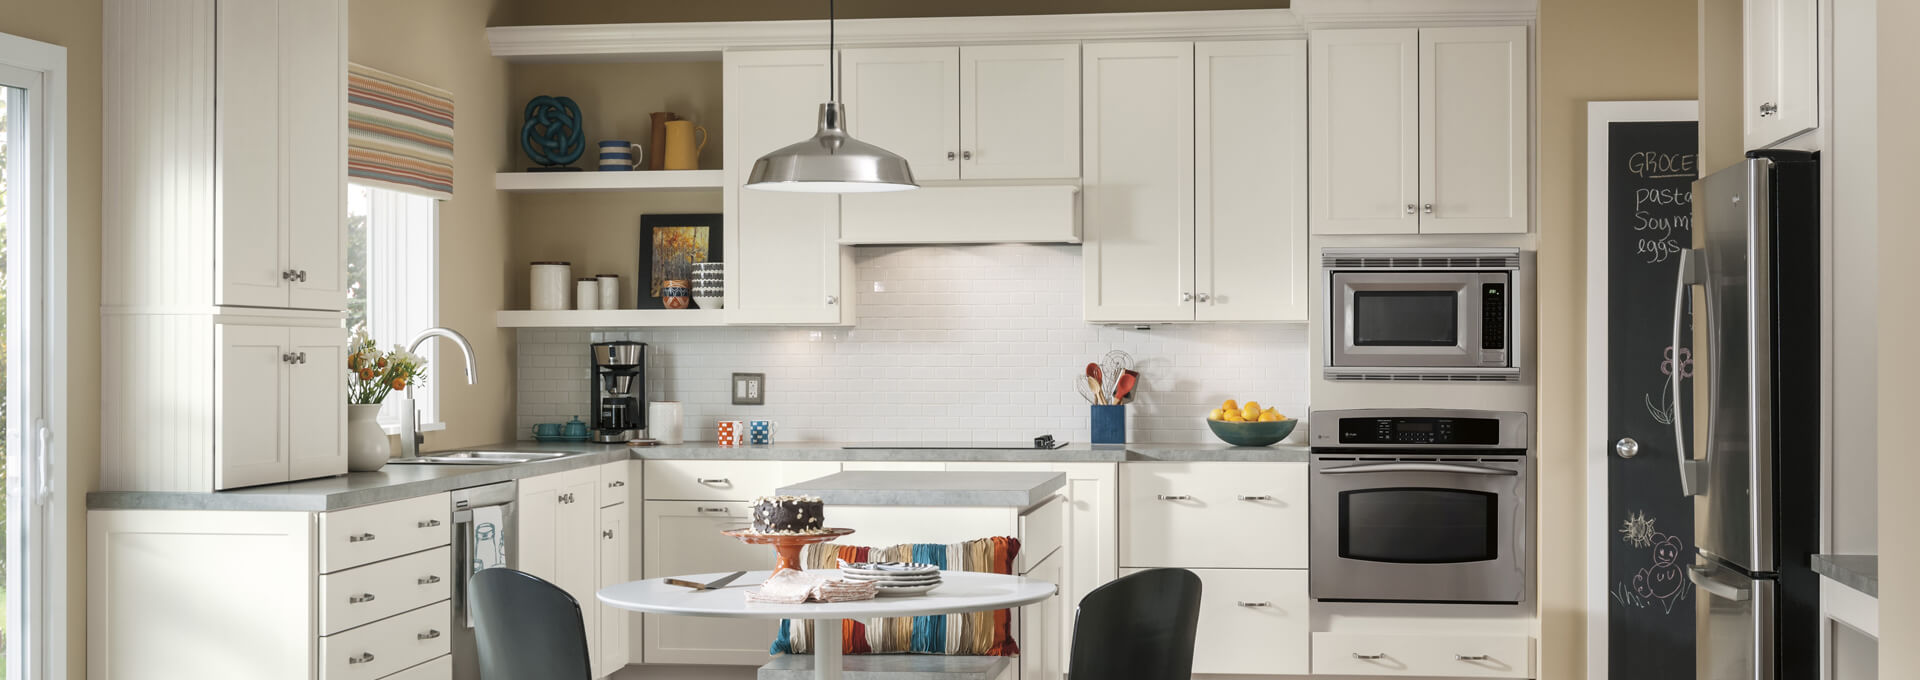 white painted kitchen cabinets